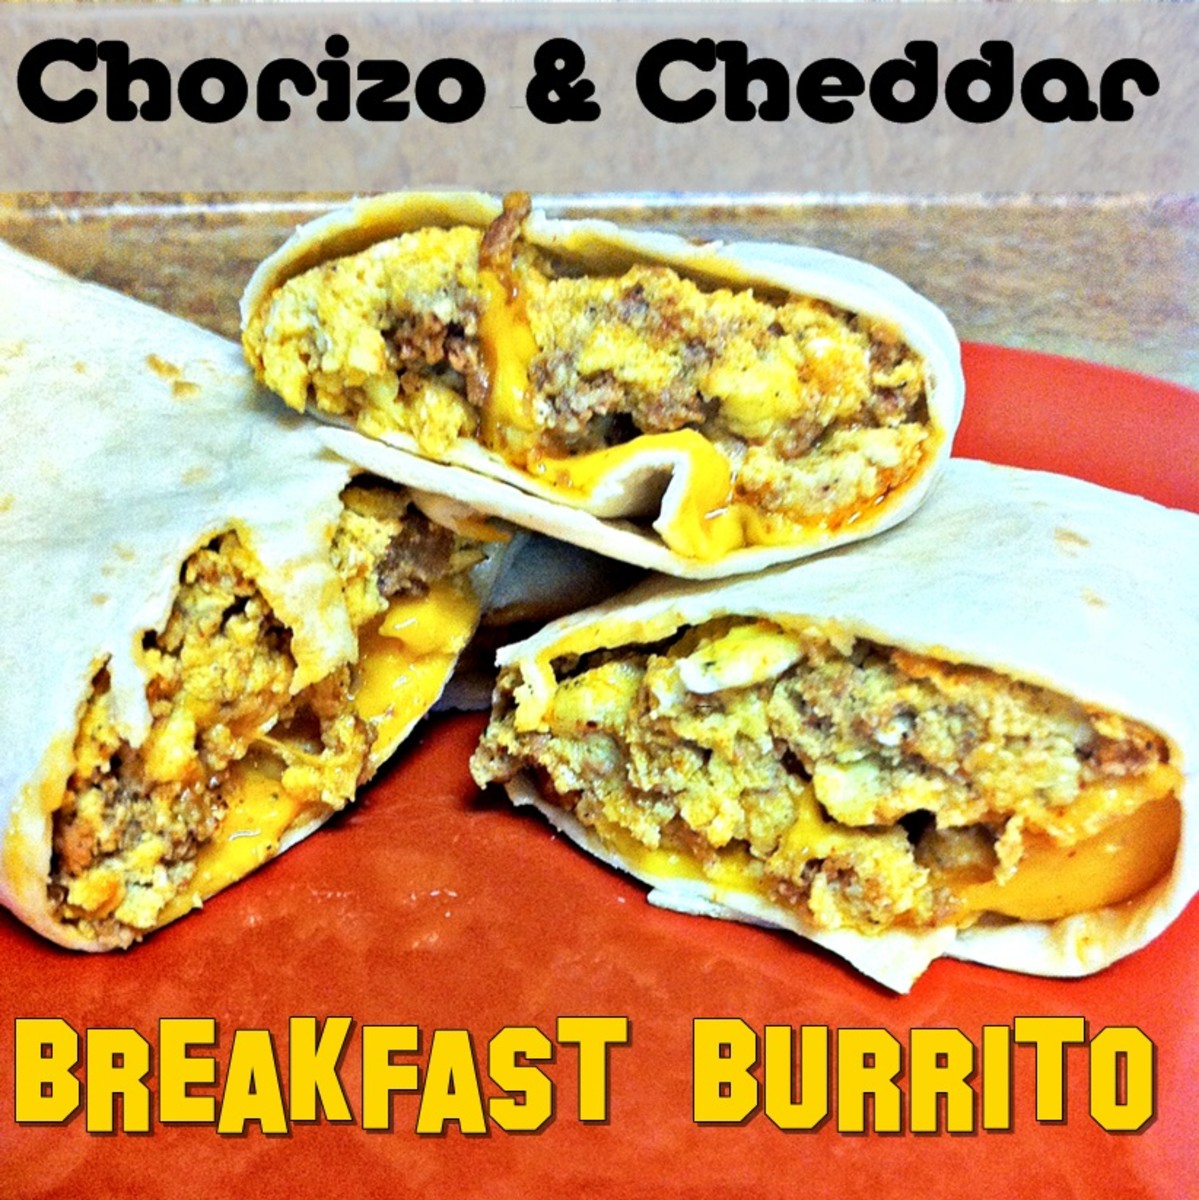 You will love this easy and delicious breakfast burrito! Step-by-step Instructions with photos.